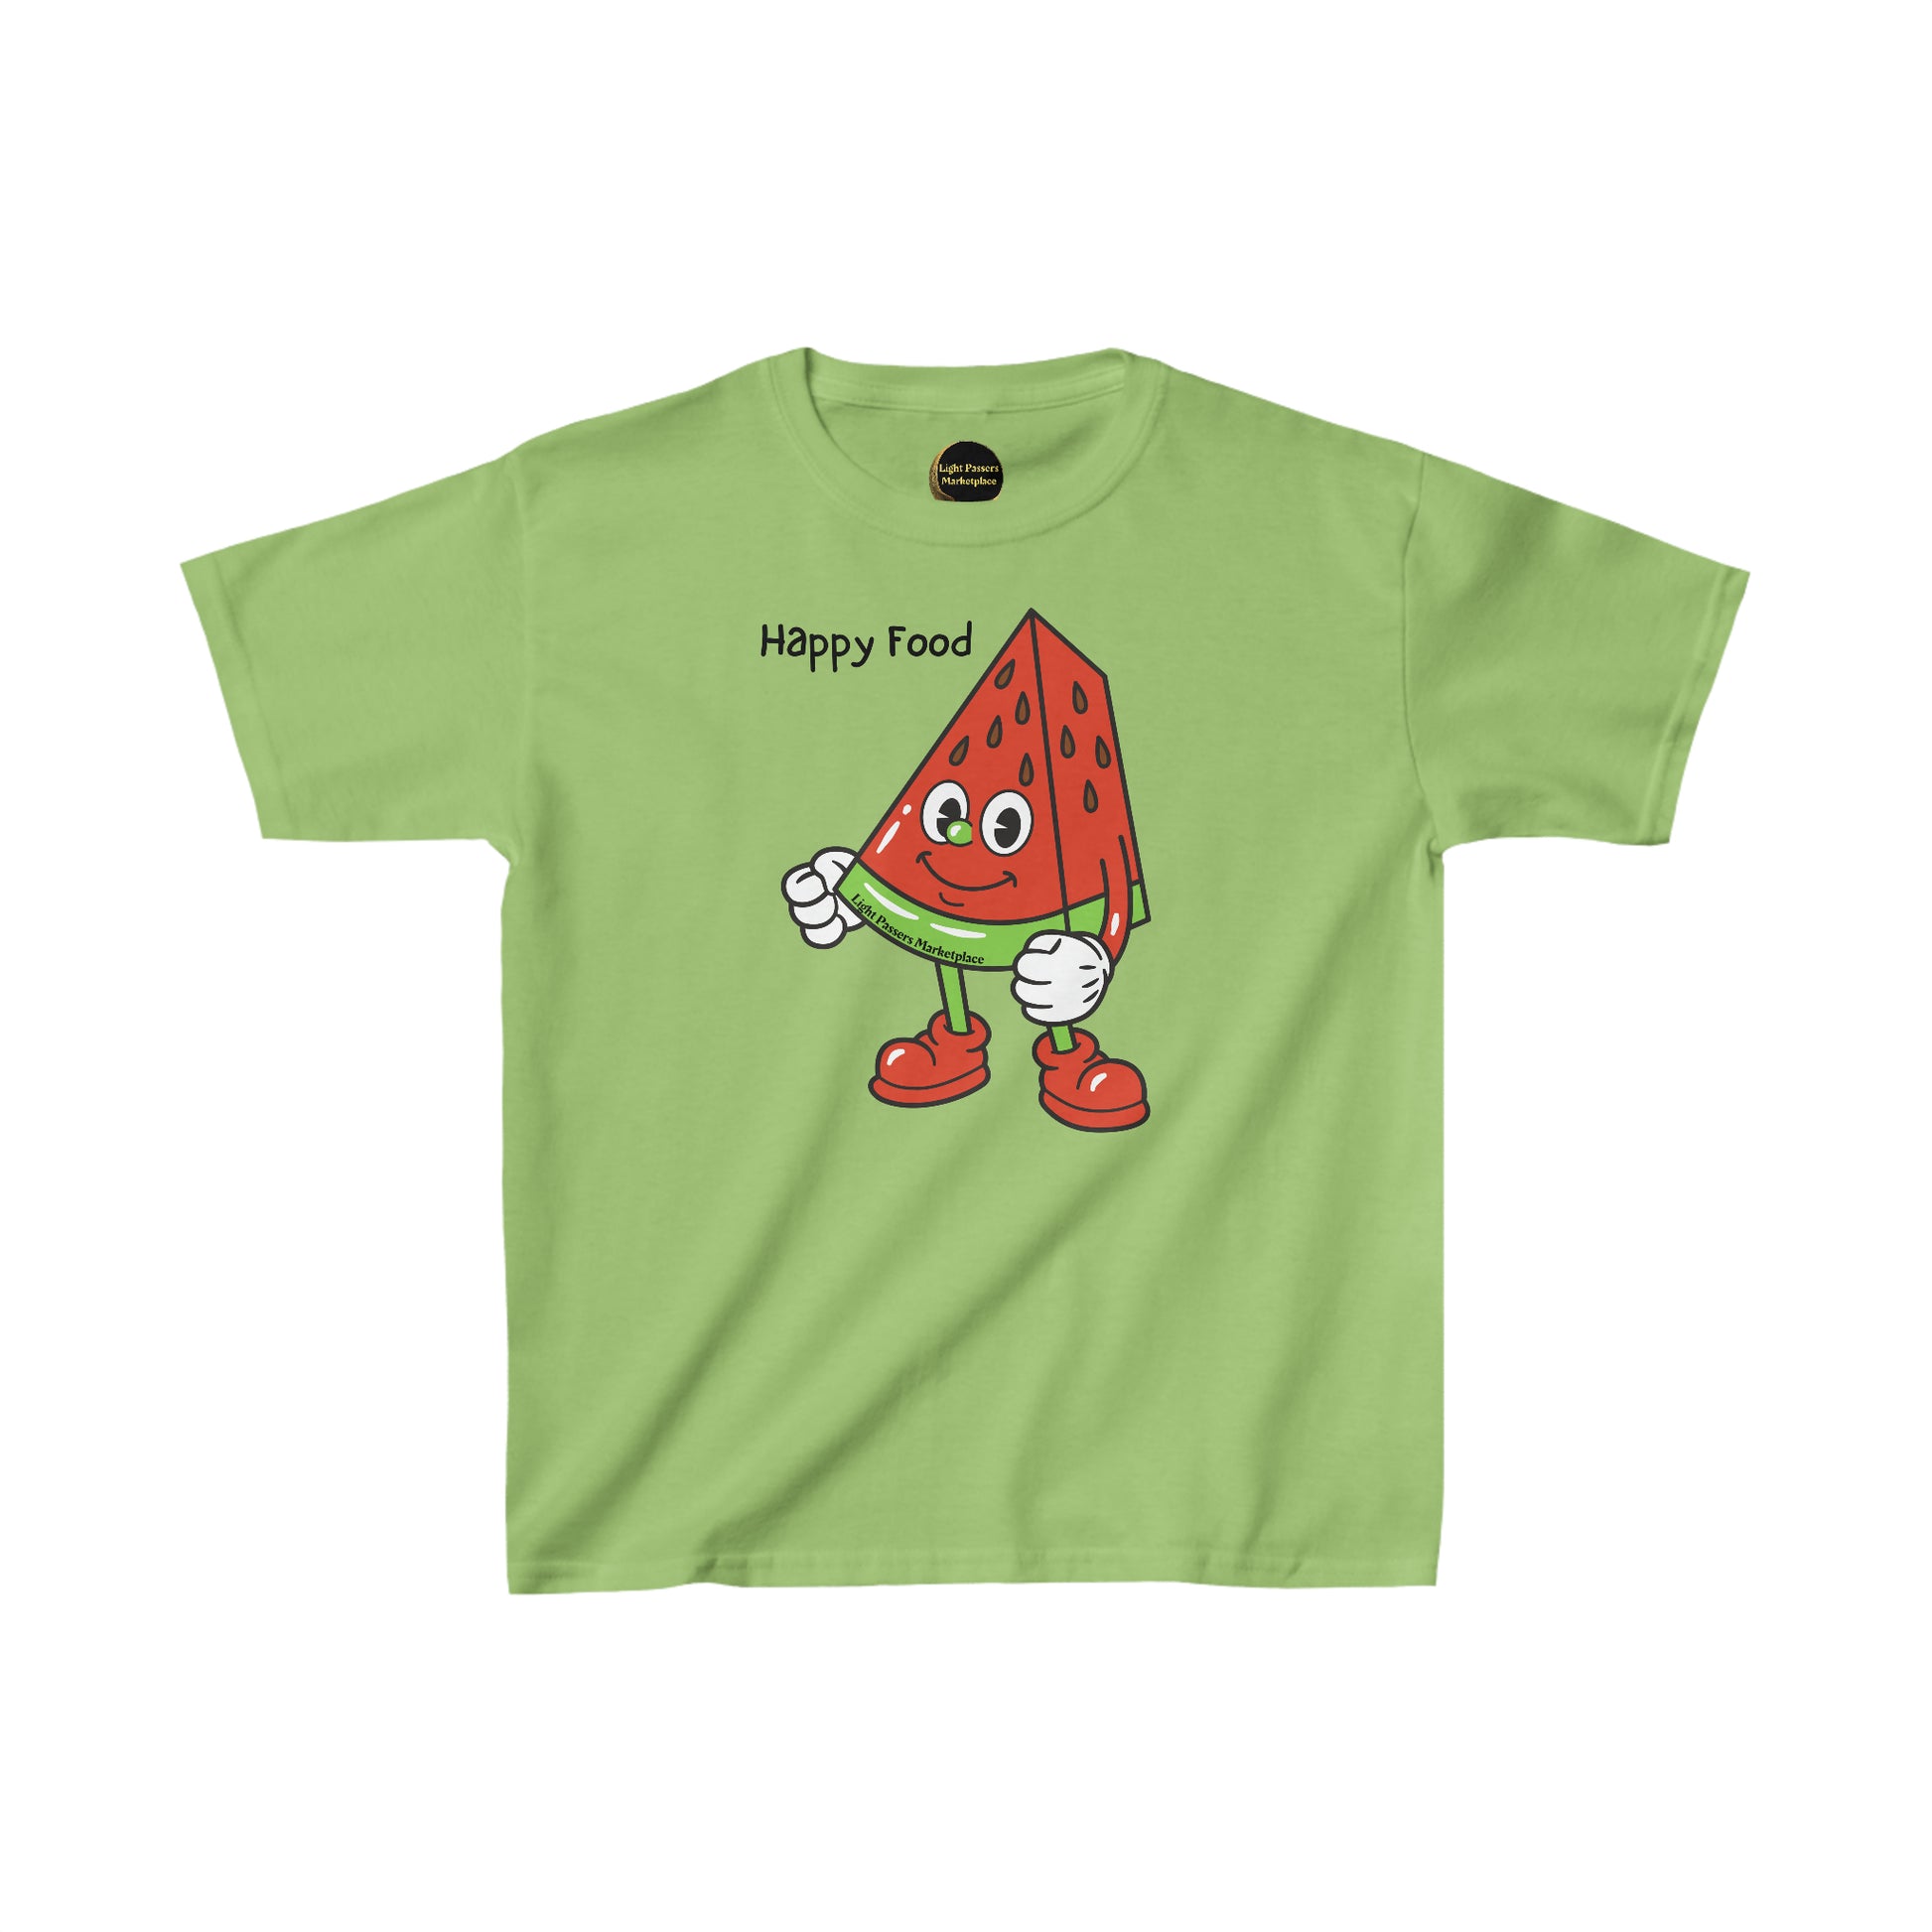 A green youth t-shirt featuring a cartoon watermelon character, made of 100% cotton for comfort, with twill tape shoulders for durability and a curl-resistant collar. Ethically sourced and Oeko-Tex certified.